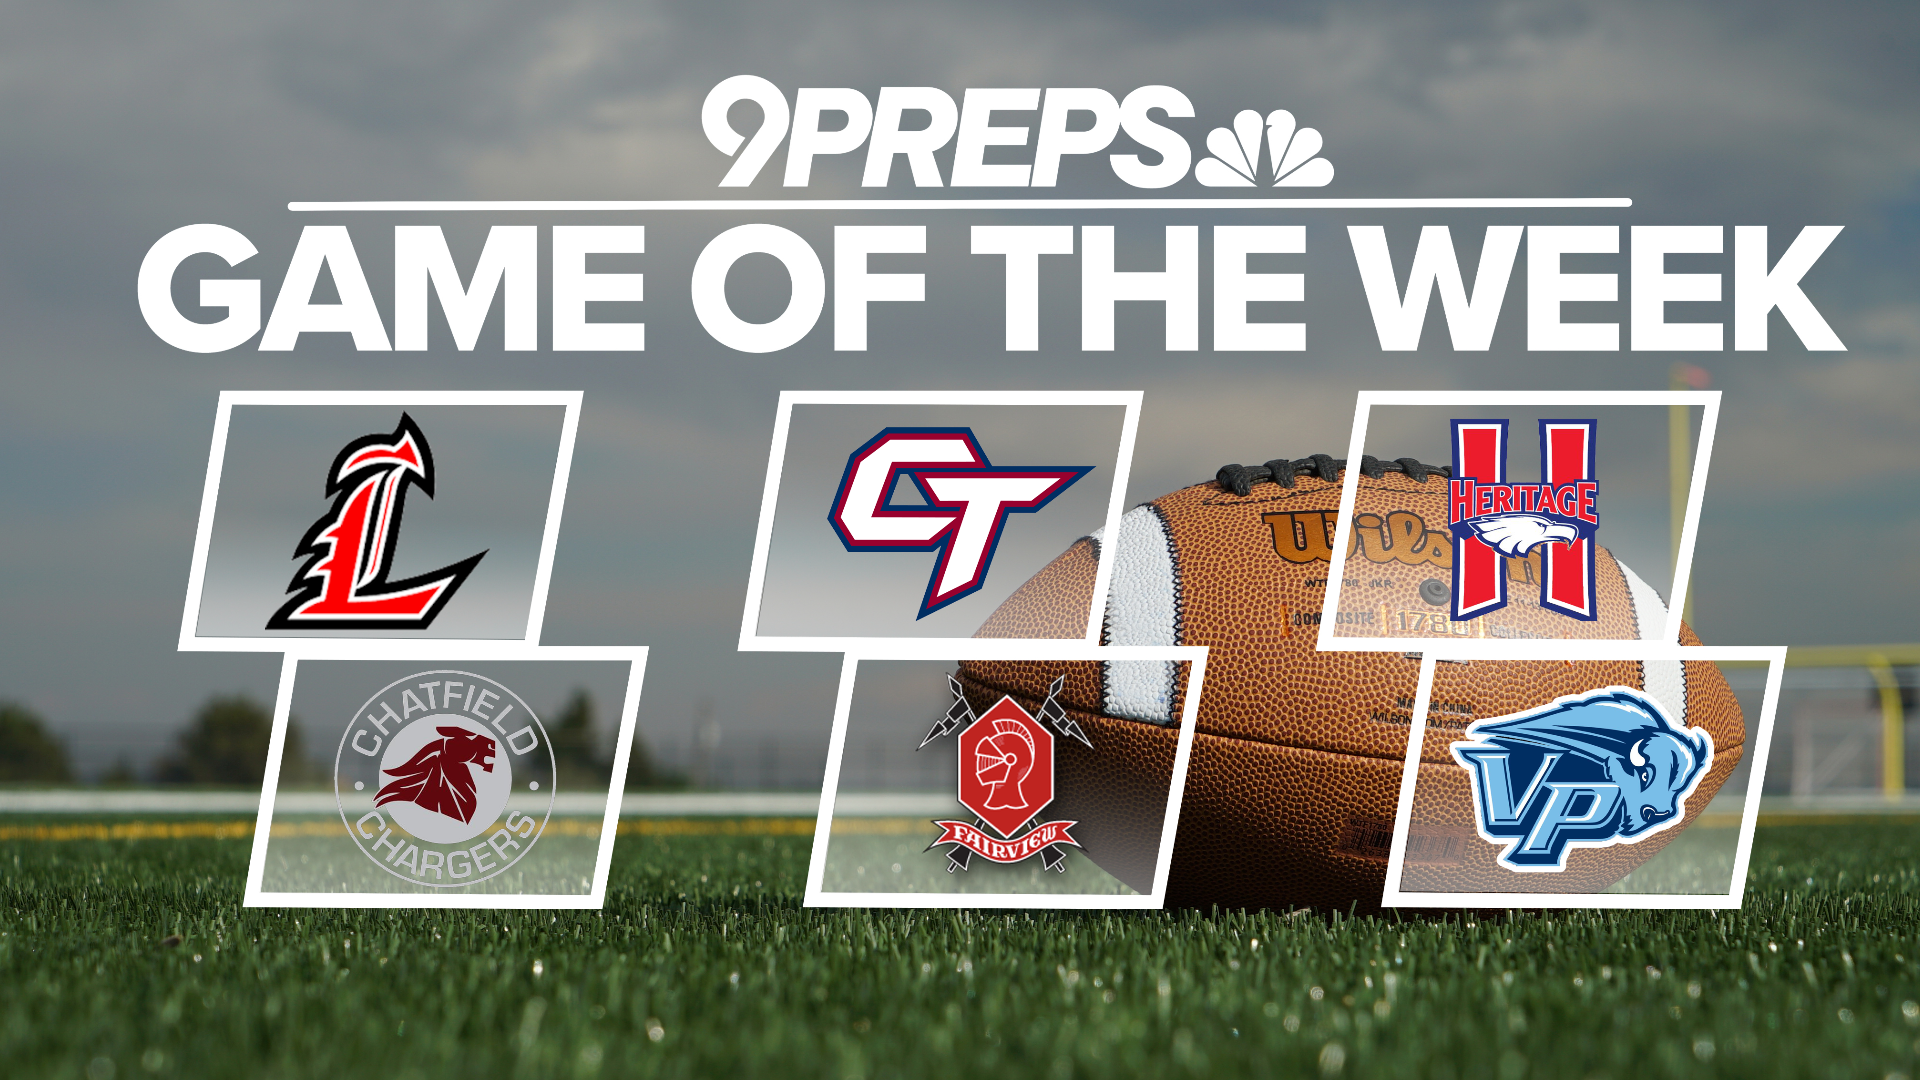 Cast your vote now through Thursday morning to help us decide which high school football game to showcase on Friday, November 15!